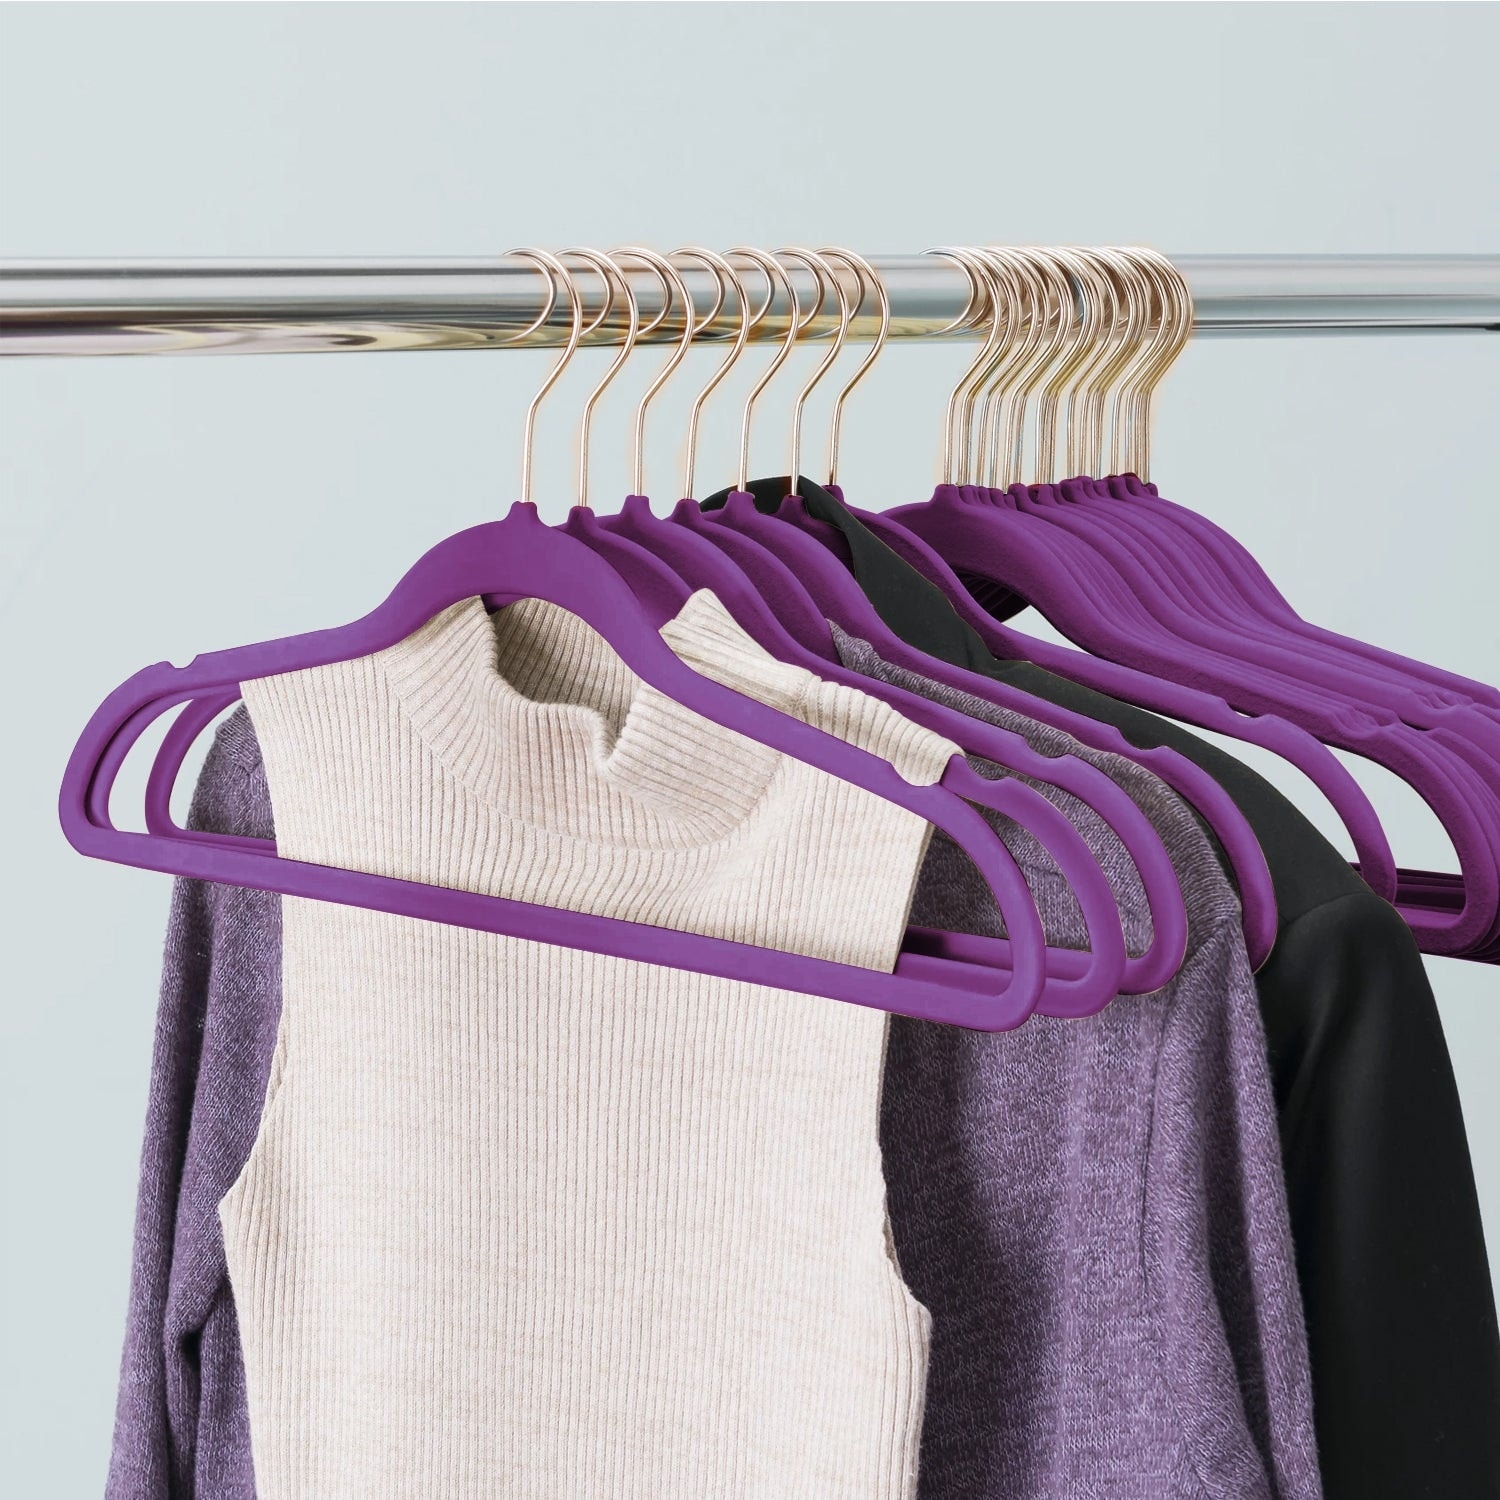 Premium Space Saving Velvet Hangers Holds Up To 10 Lbs, Clothes